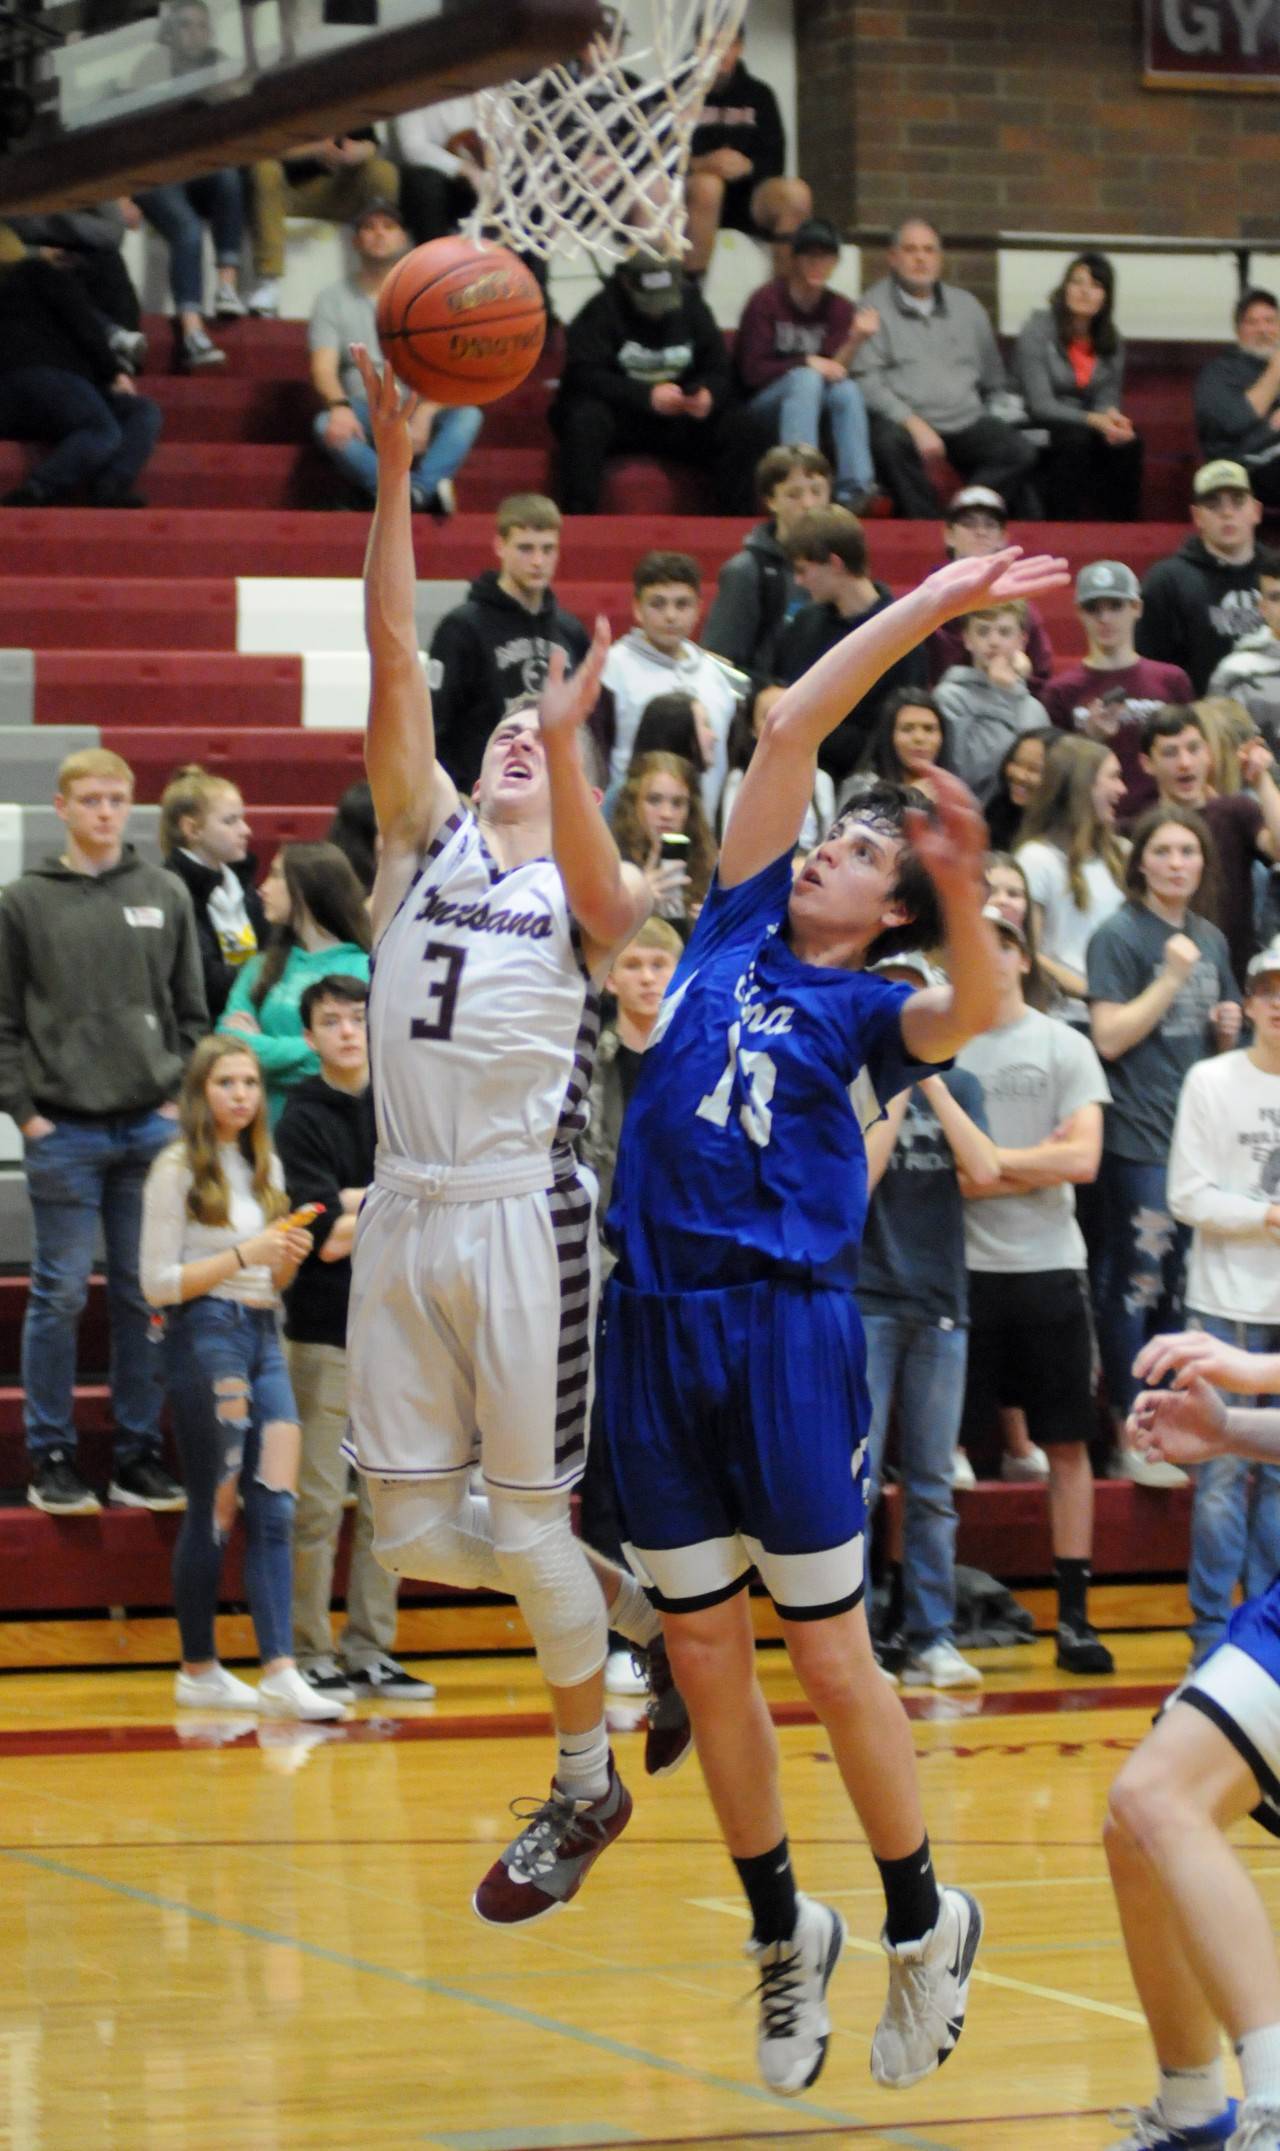 Montesano’s Braden Dohrmann (3) scores on a layup while being defended by Elma’s Sawyer Witt during the Bulldogs’ 70-61 victory on Thursday in Montesano. Dohrmann led the Bulldogs with 24 points while Witt scored a game-high 30 points. (Ryan Sparks | Grays Harbor News Group)